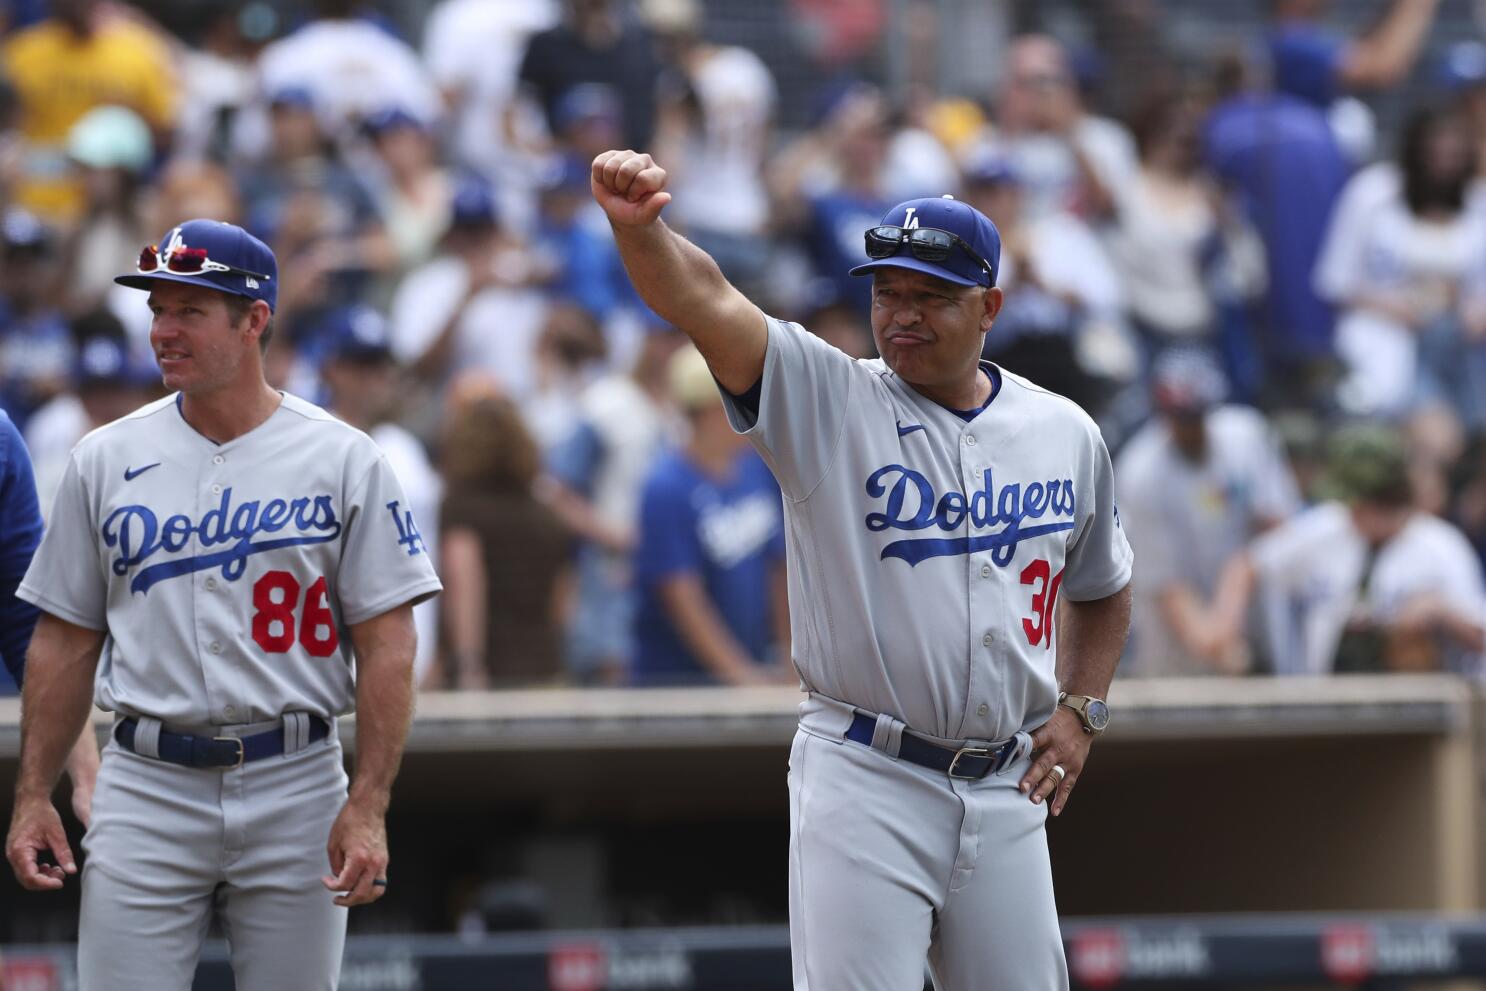 The Dodgers are OUT! San Diego Padres seal 5-3 victory to win